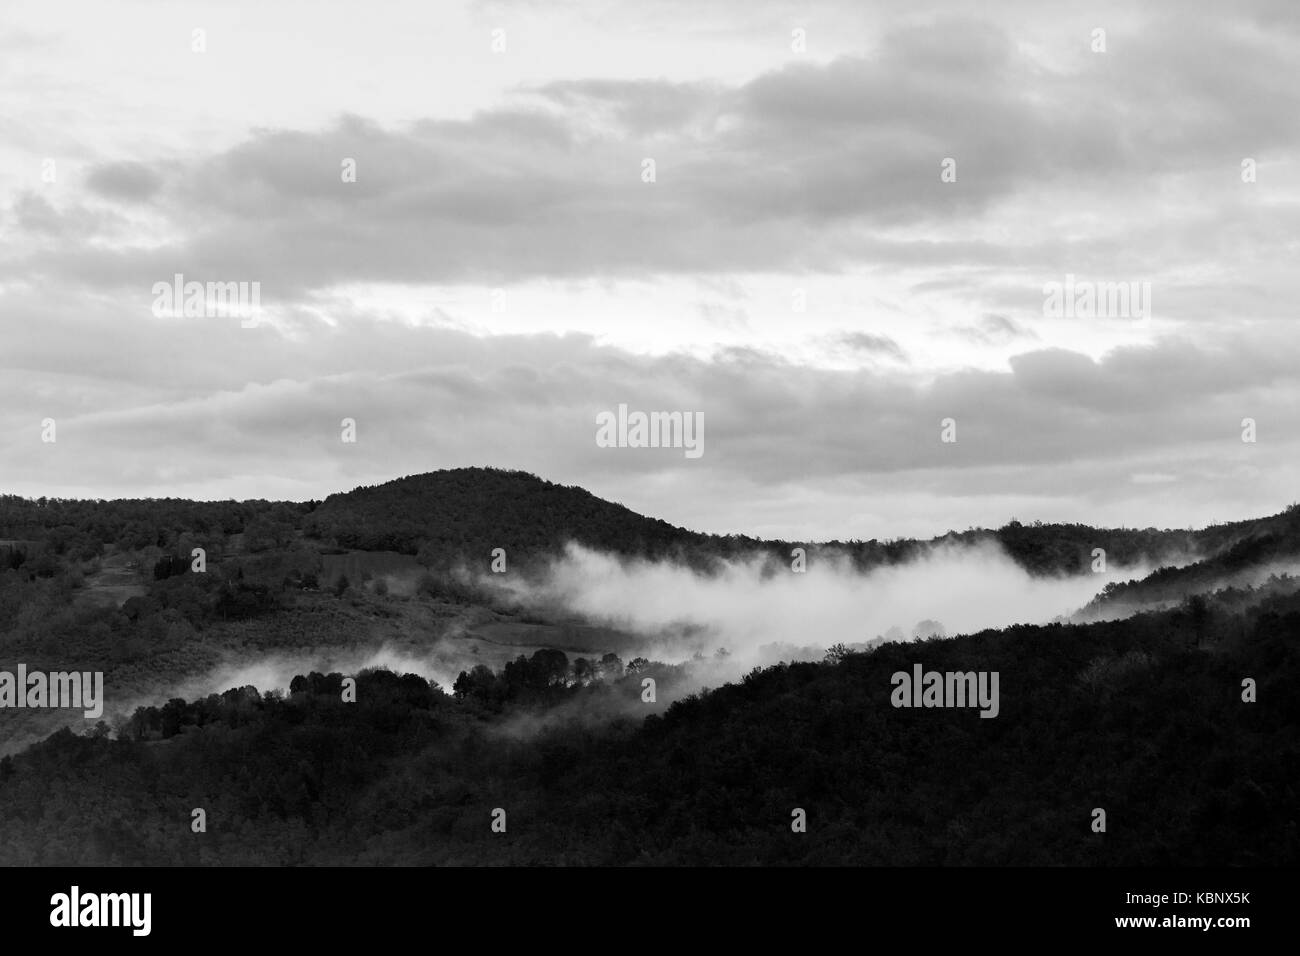 Mist in the middle of some hills, beneath an overcast sky Stock Photo